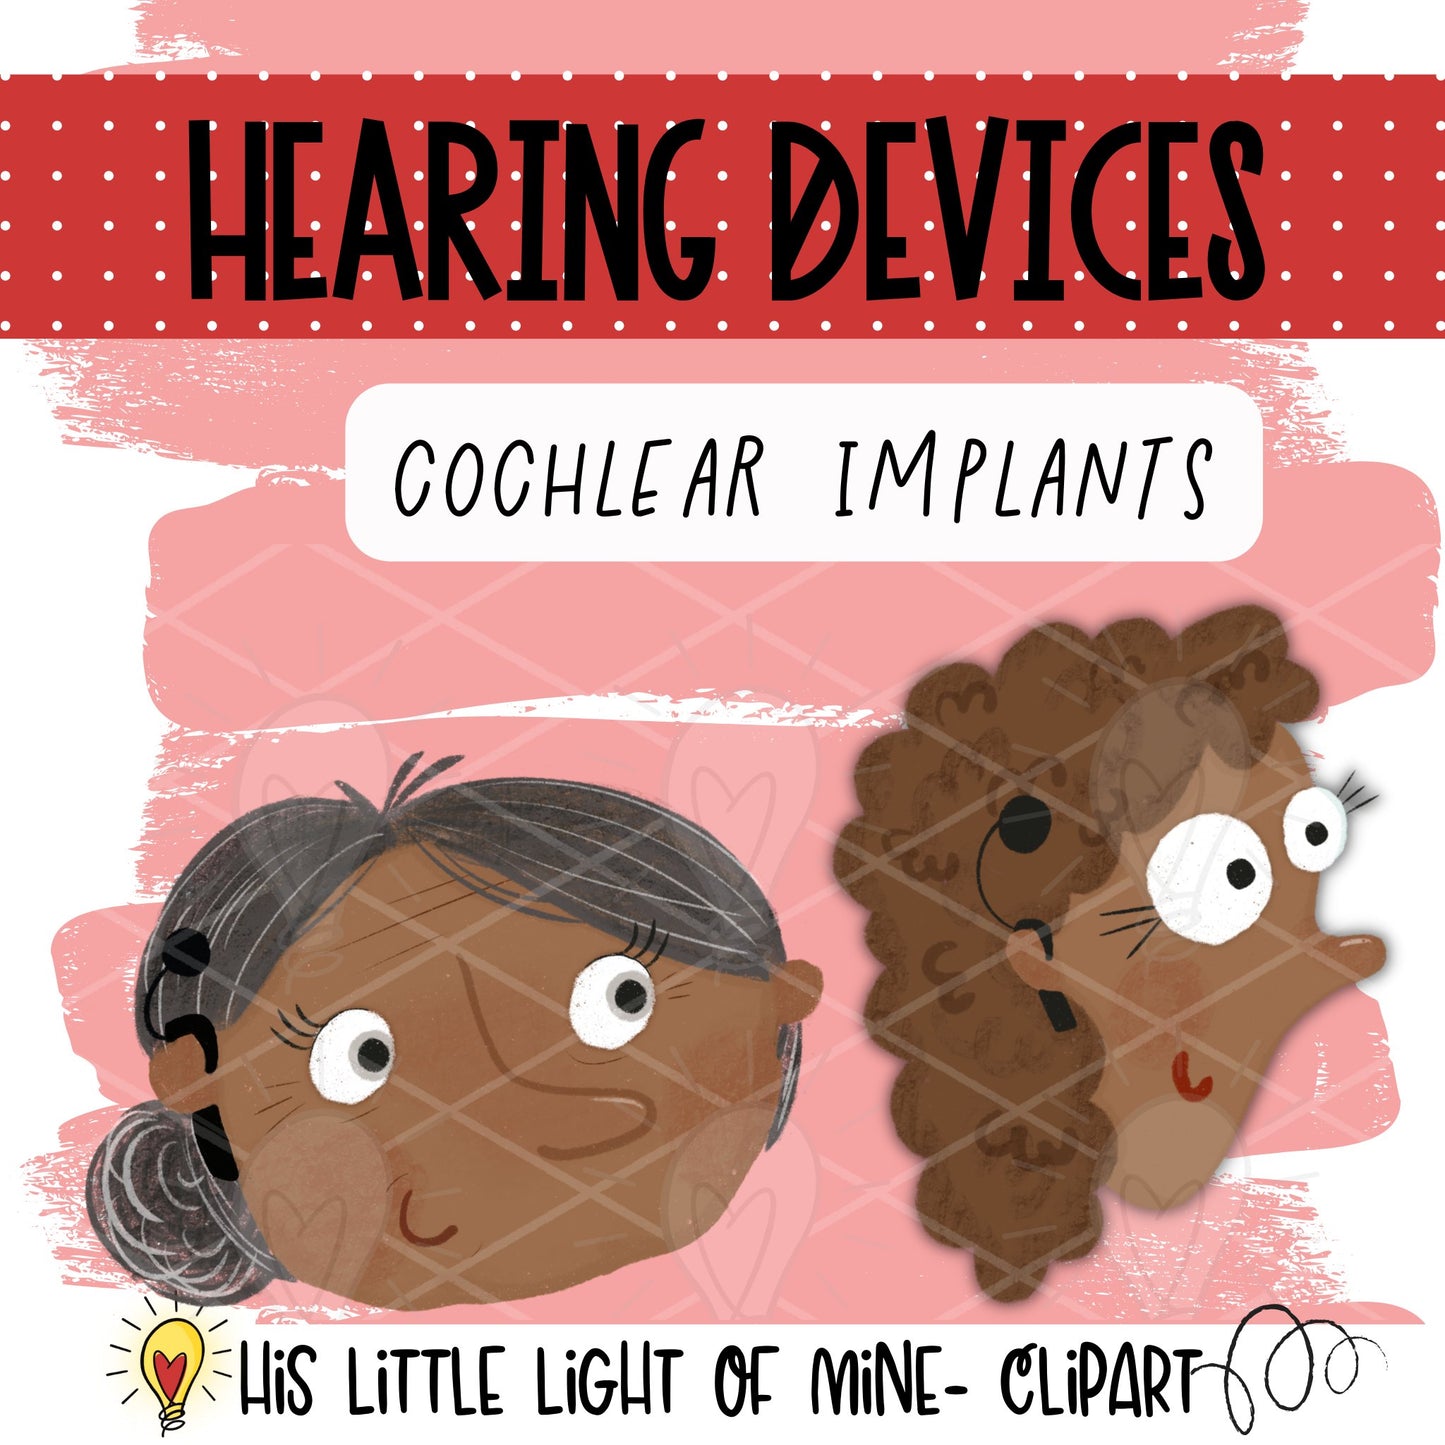 Example clip art images of female adults wearing cochlear implants 